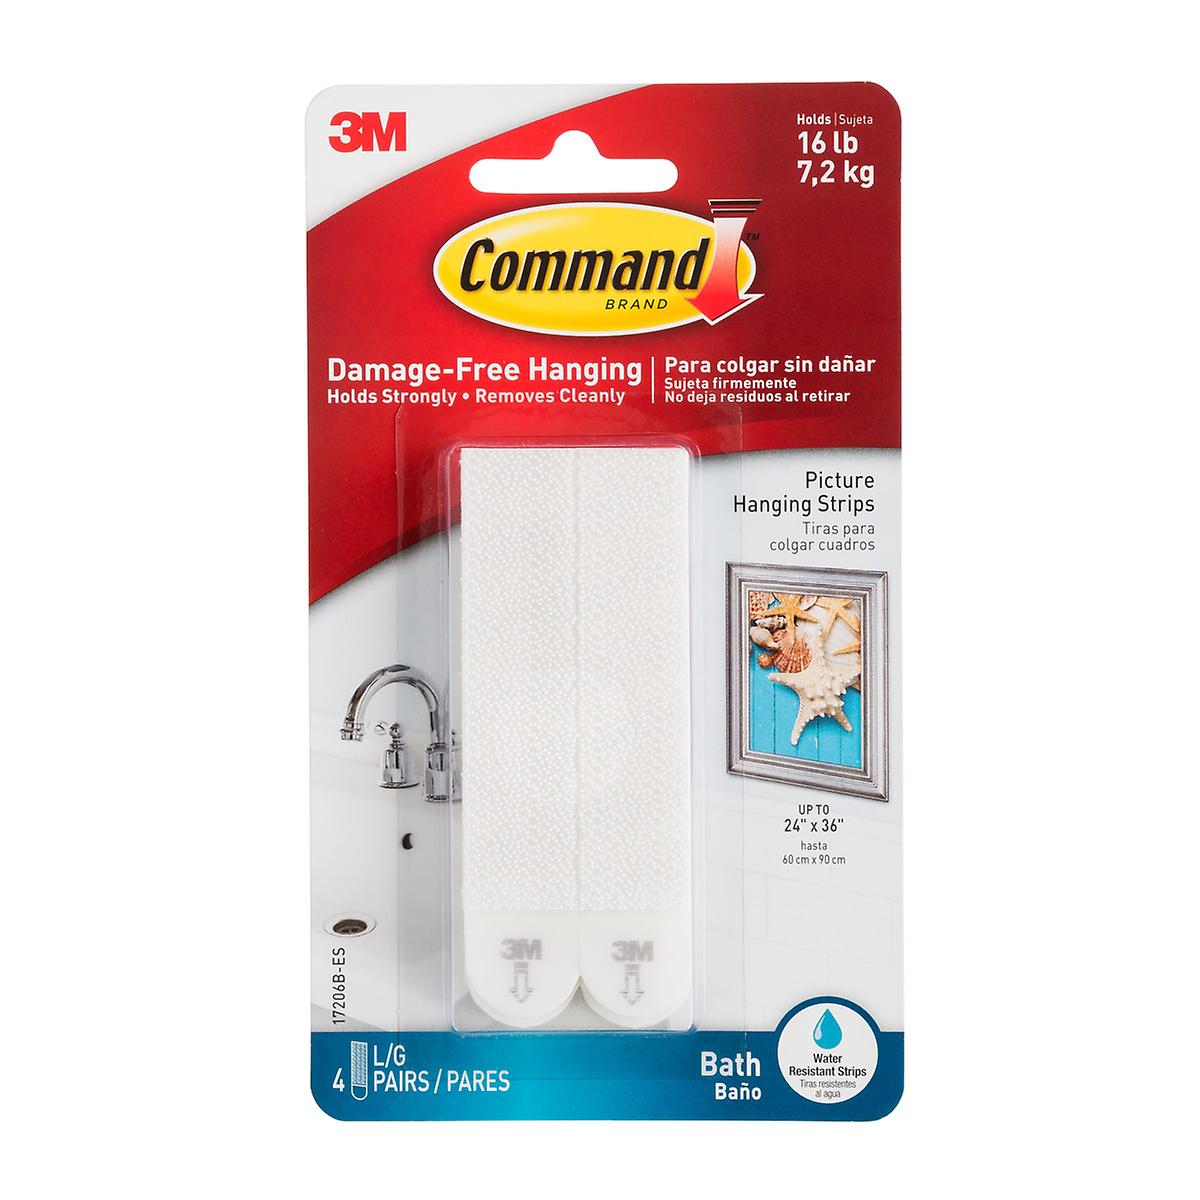 3M Command Bath Picture Hanging Strips | The Container Store